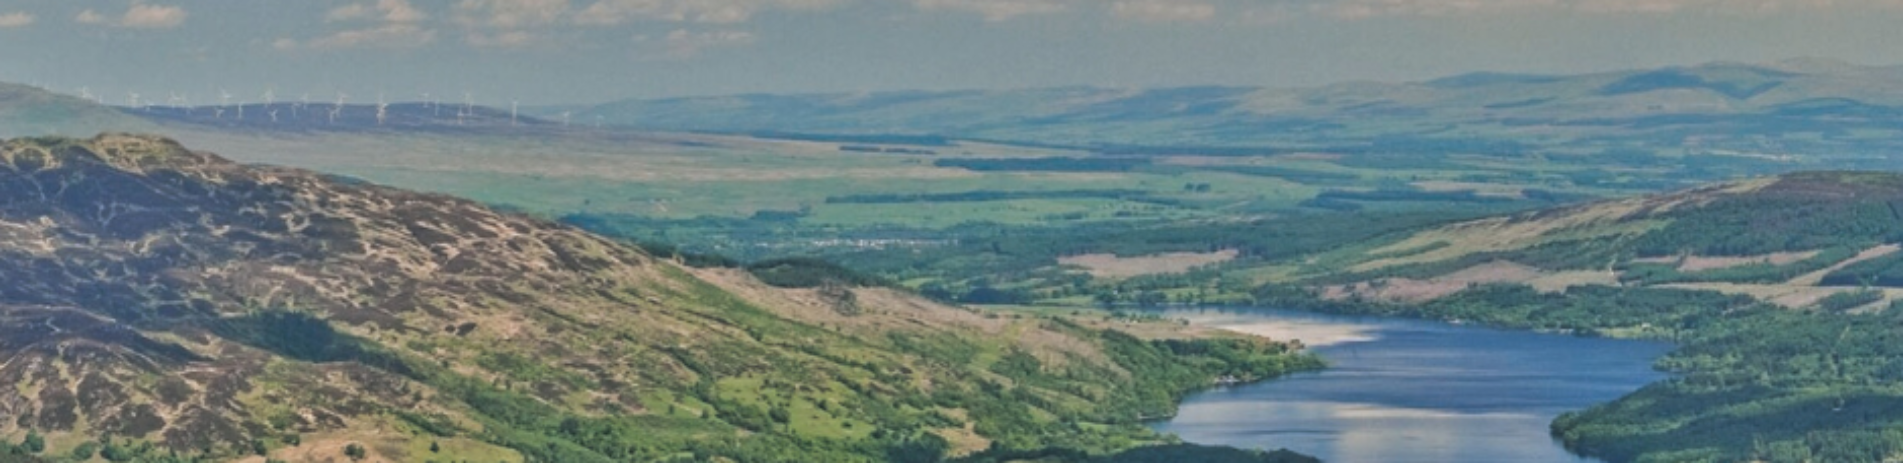 very green-landscape-of-trossachs-mountains-and-loch-venachar-on-the-right